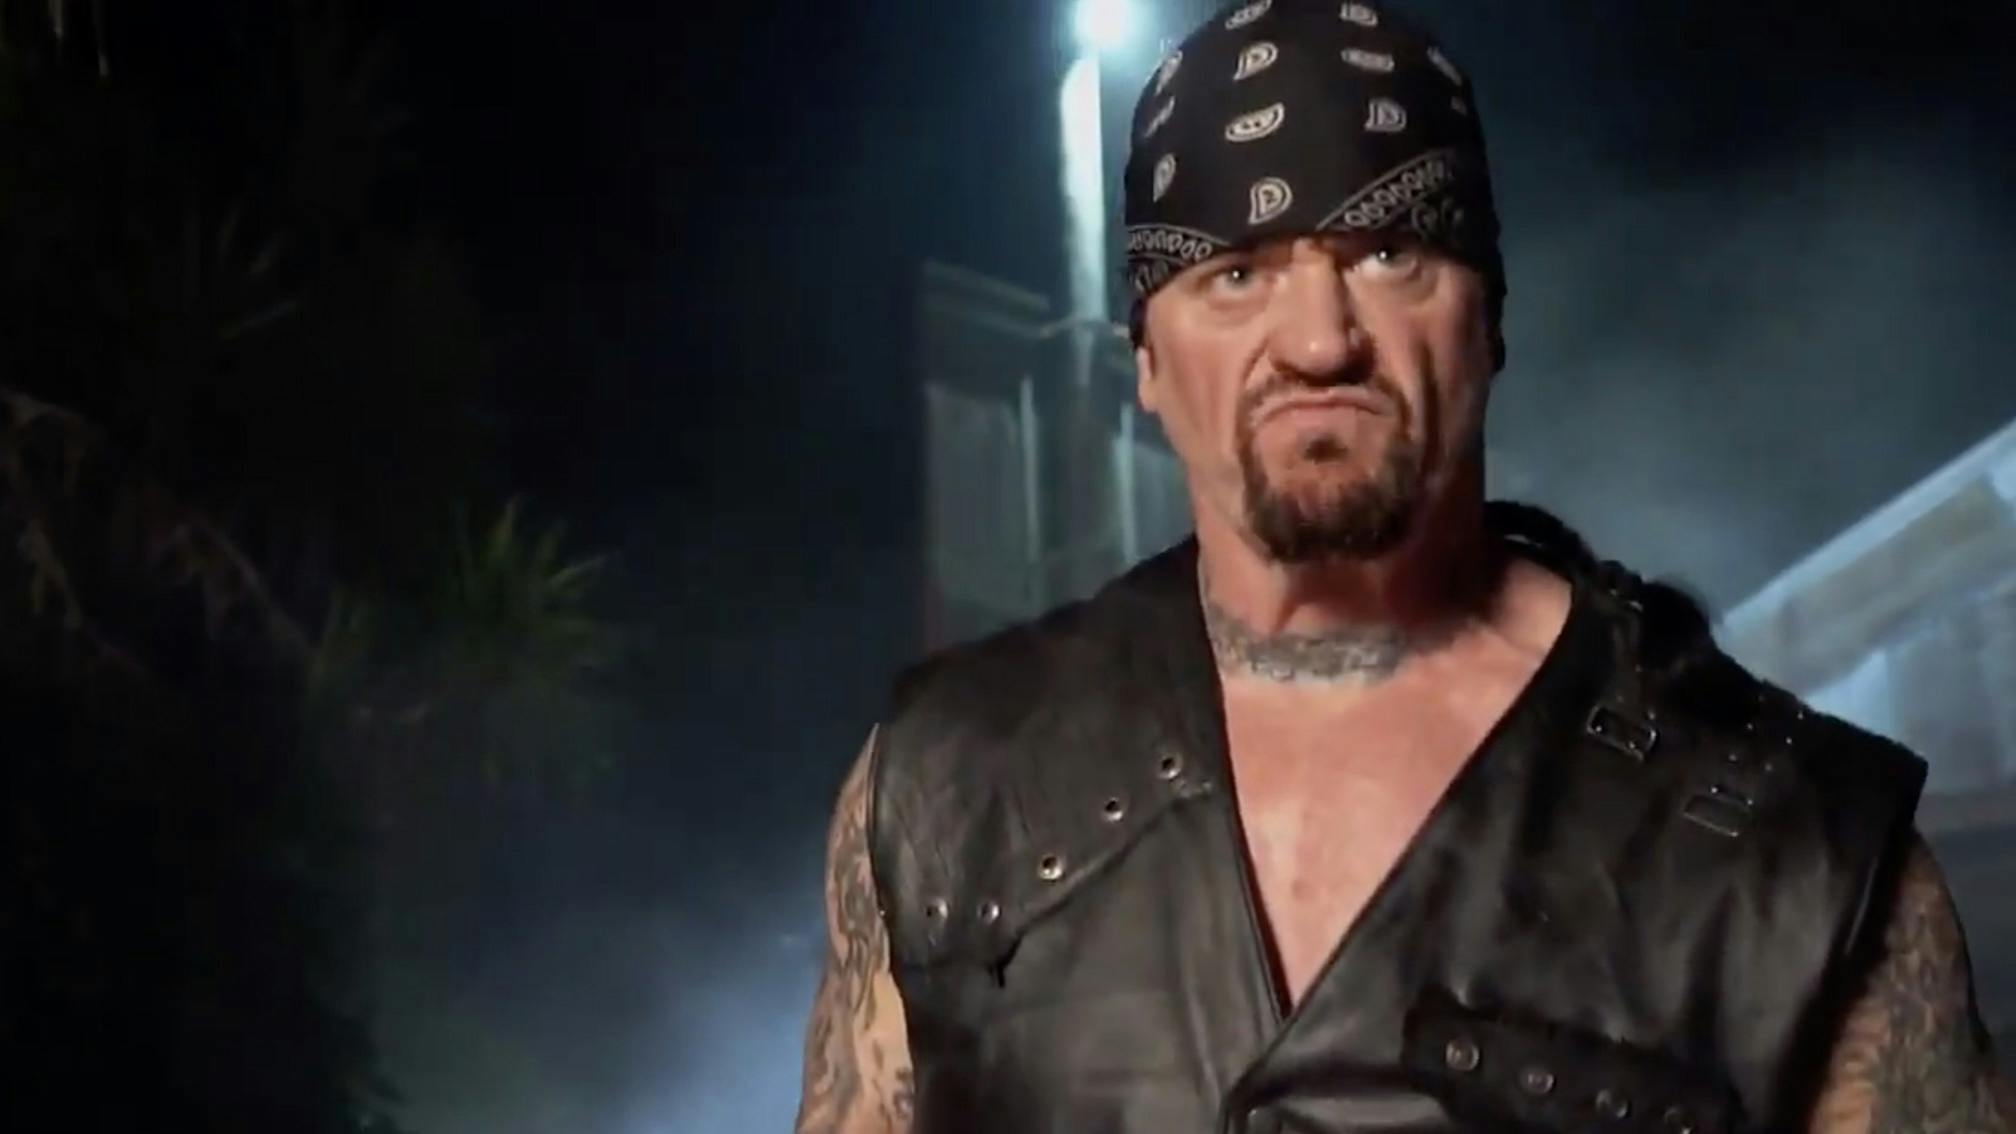 Metallica Soundtracked The Undertaker's Return To WrestleMania This Weekend